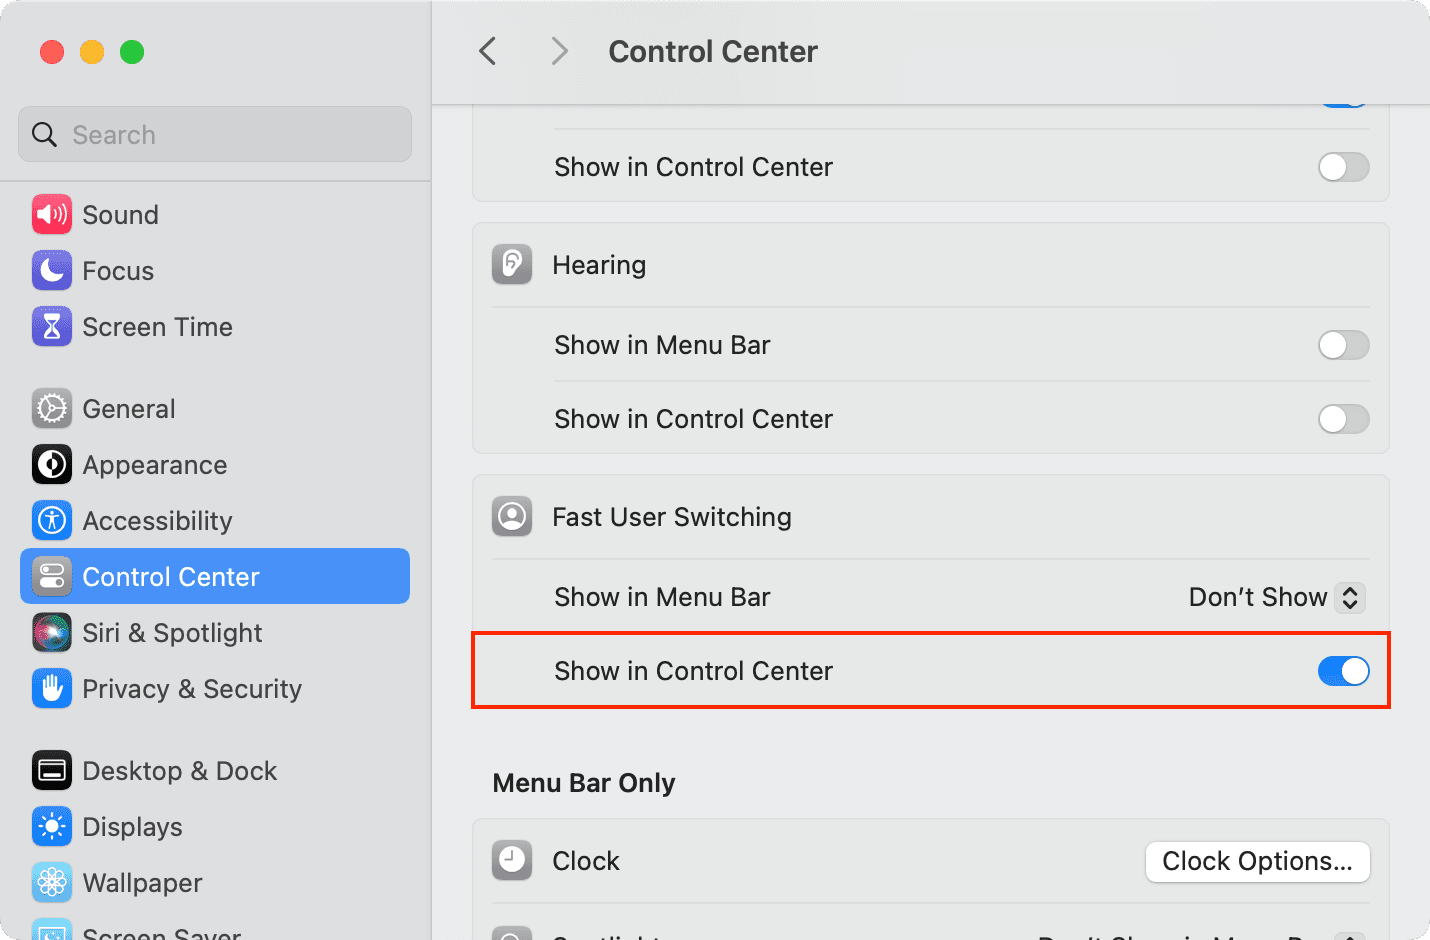 Show Fast User Switching in Control Center on Mac